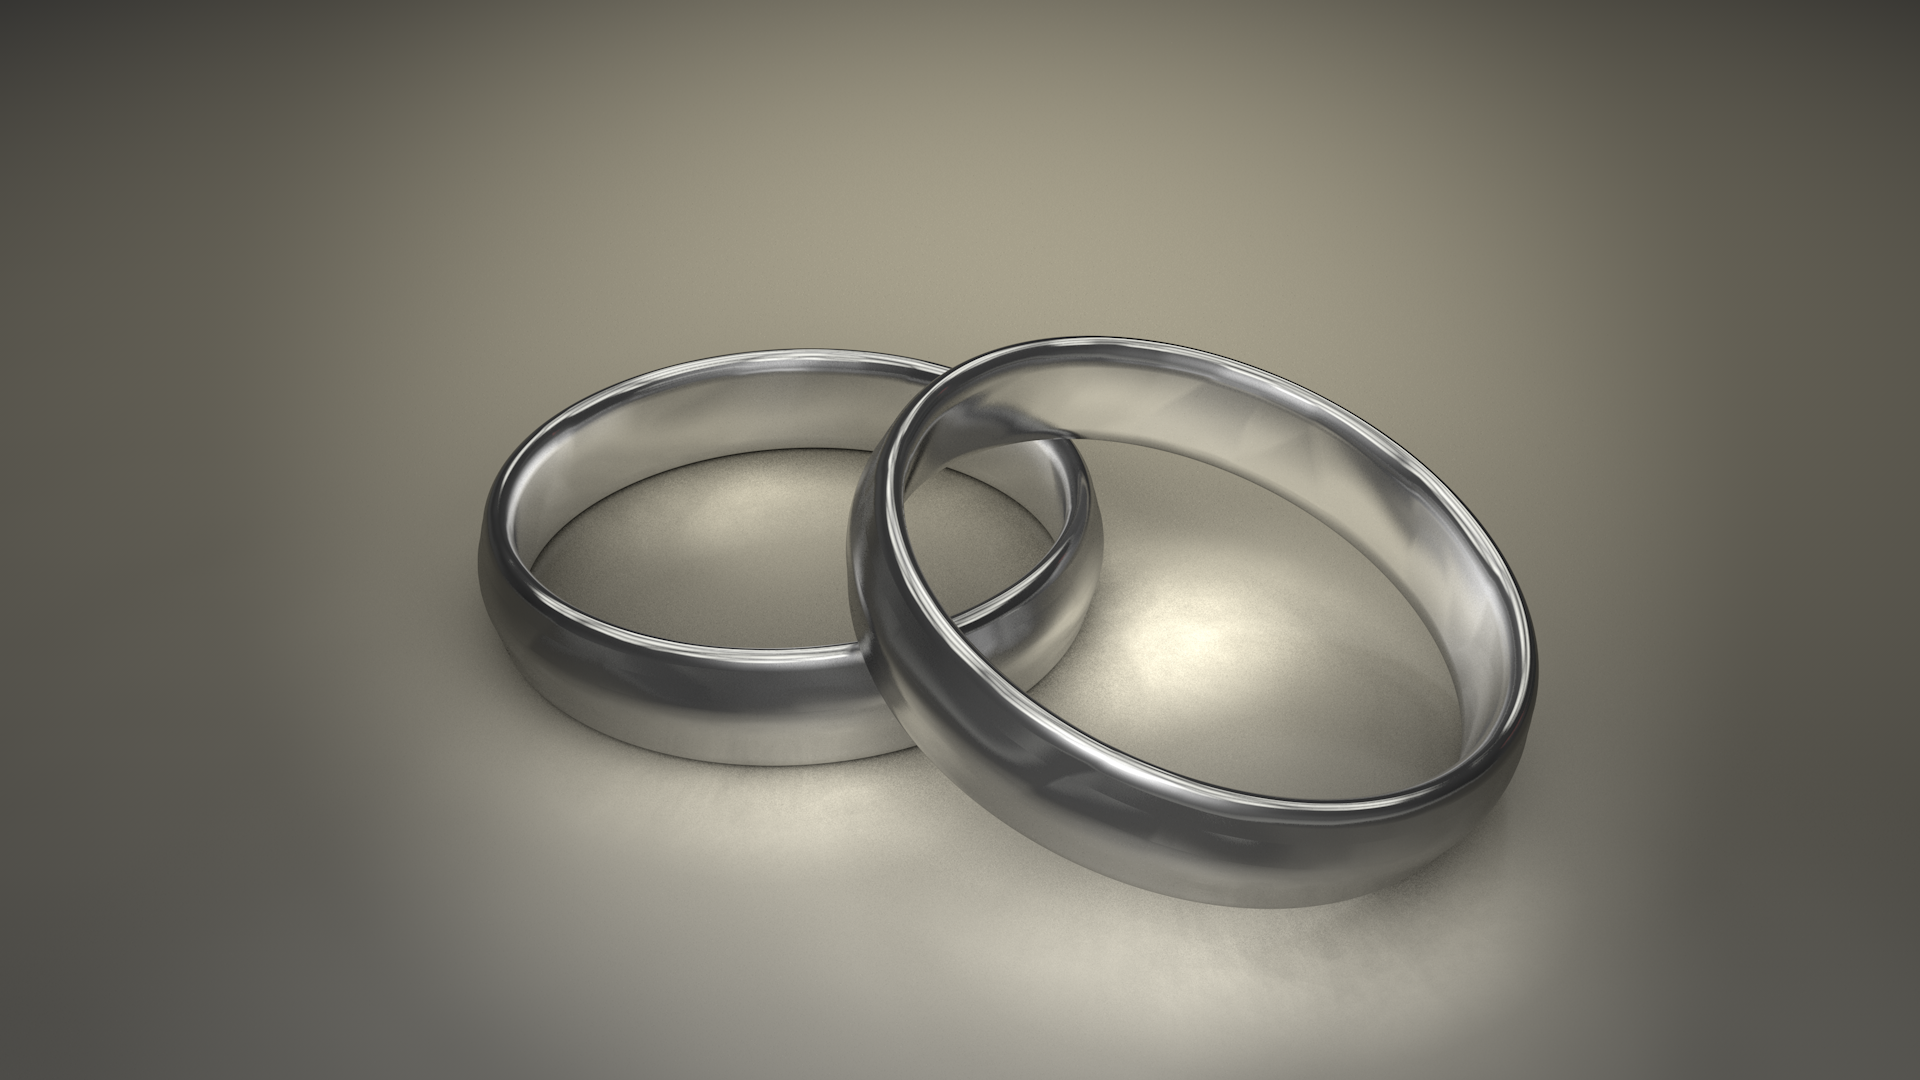 General 1920x1080 simple background wedding ring rings